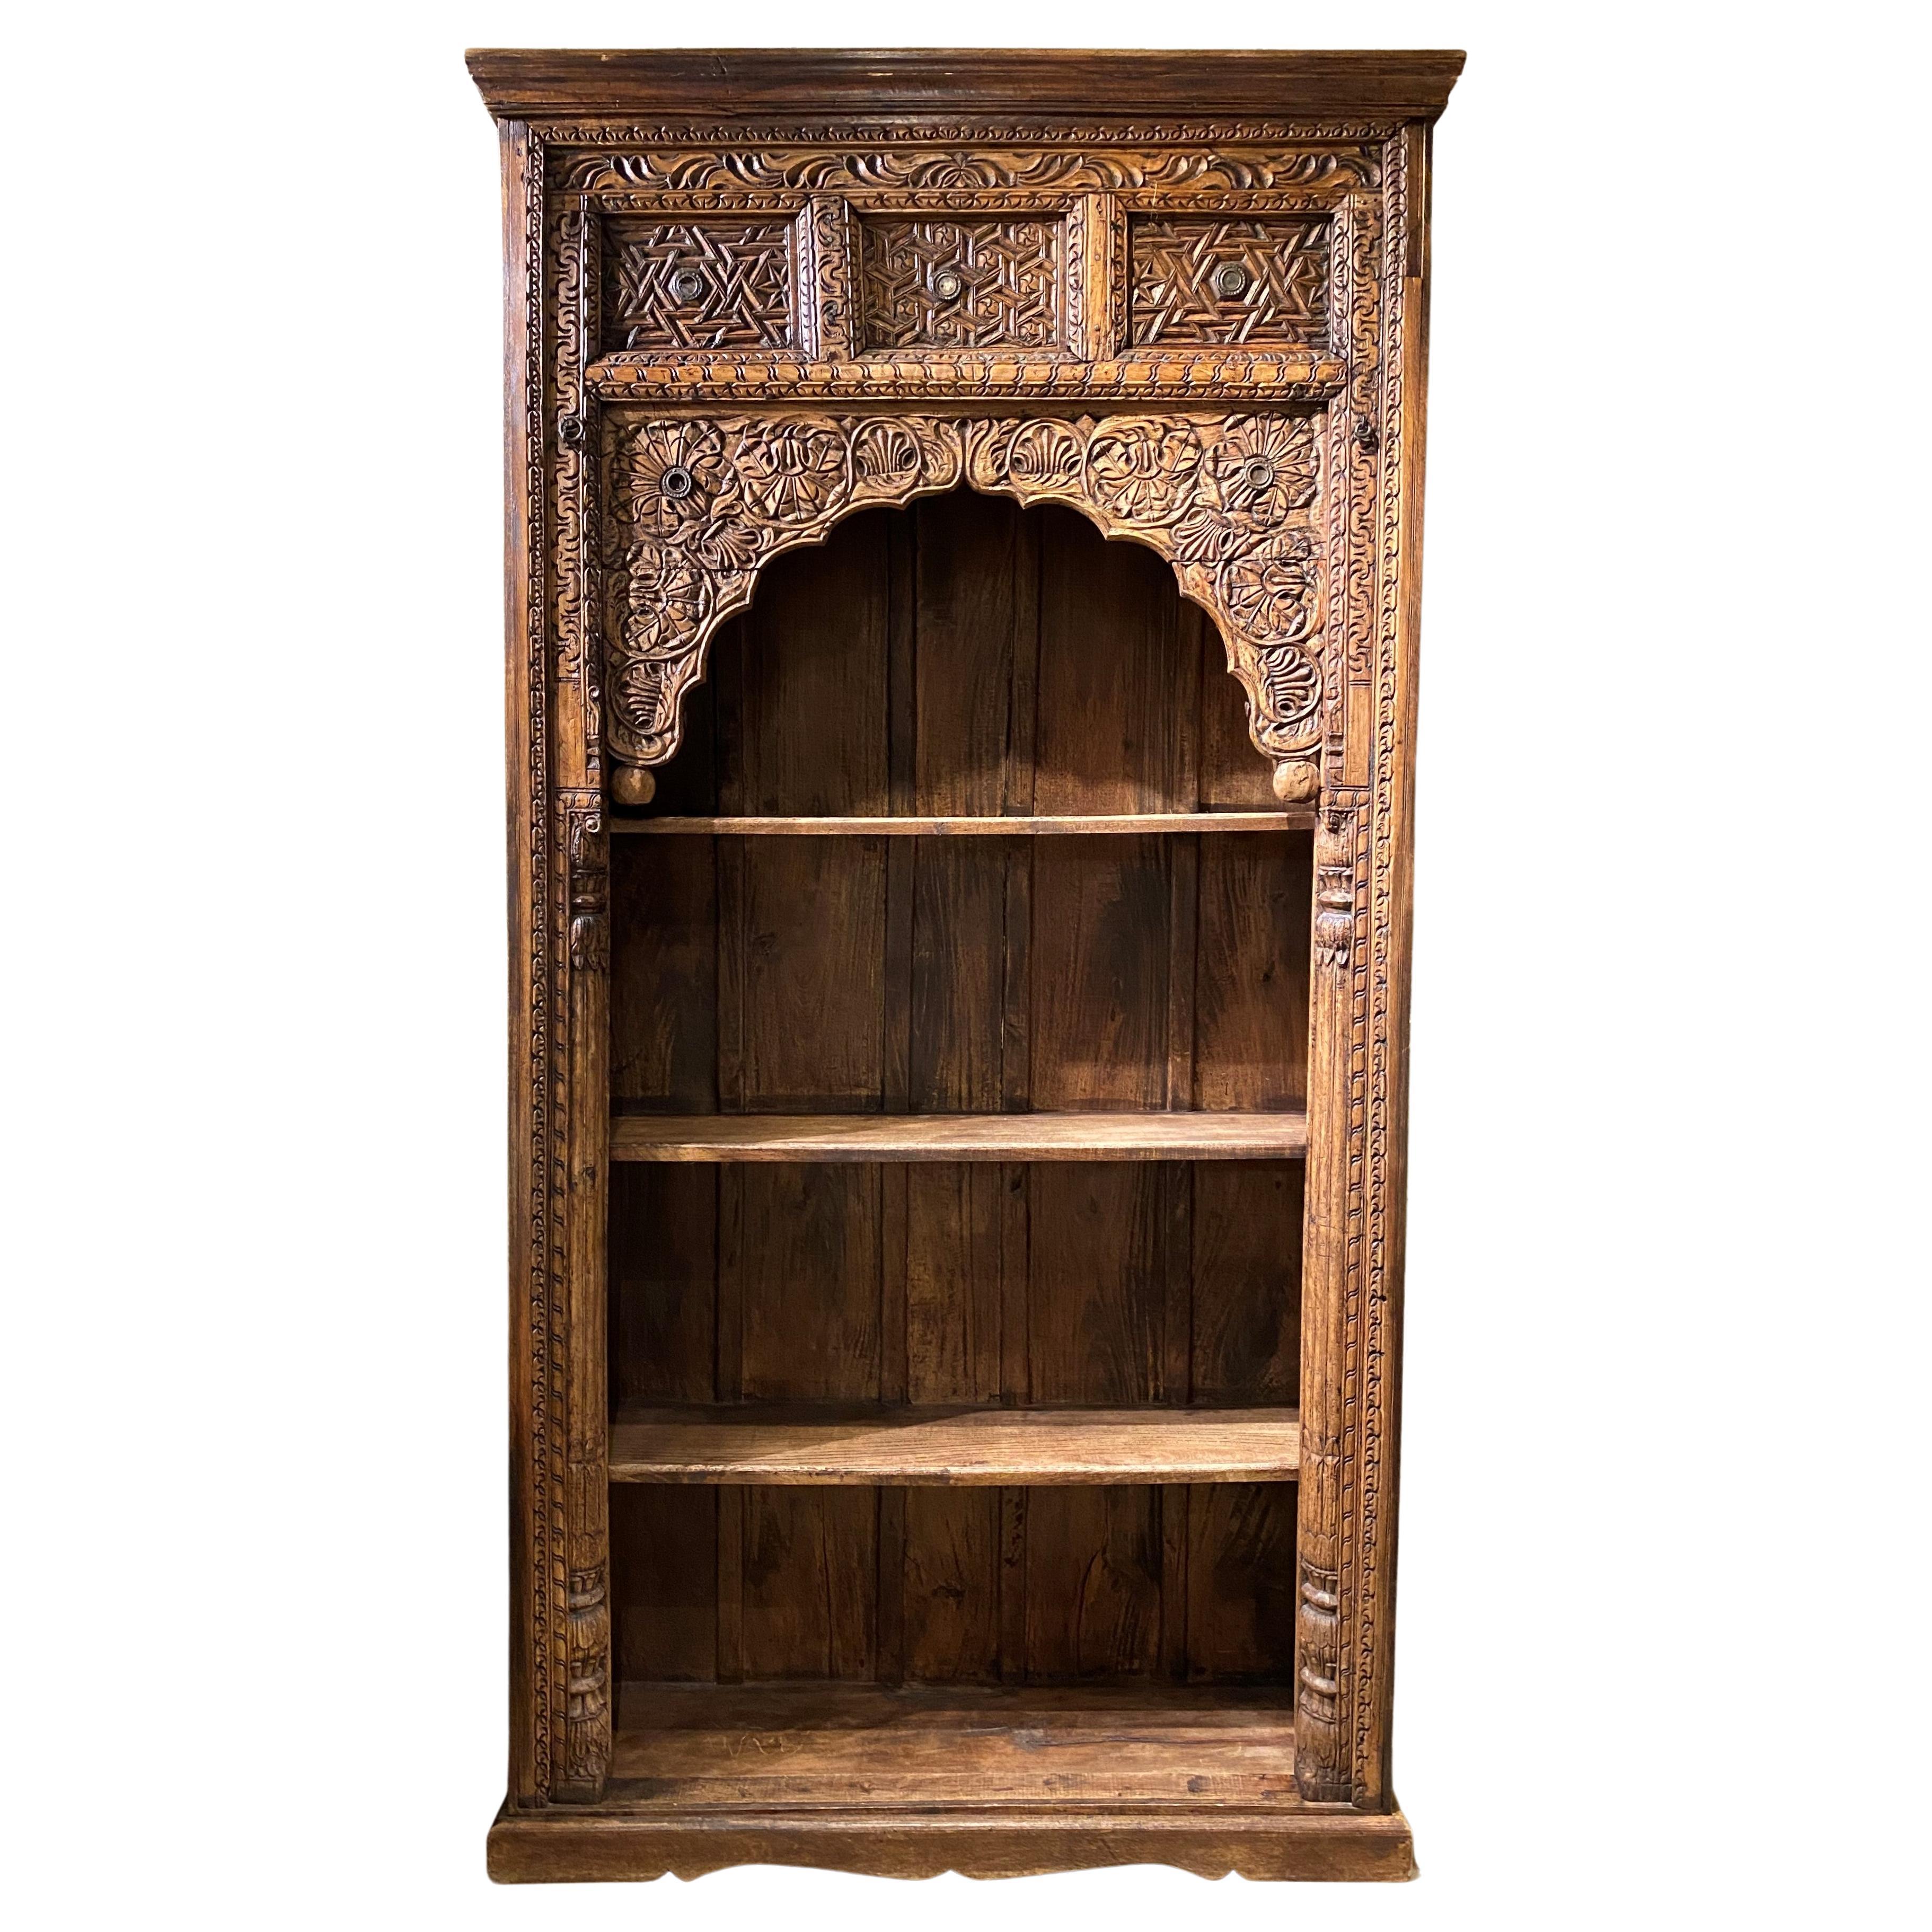 Antique Carved Wooden Indian Doorway Converted to a Bookcase For Sale